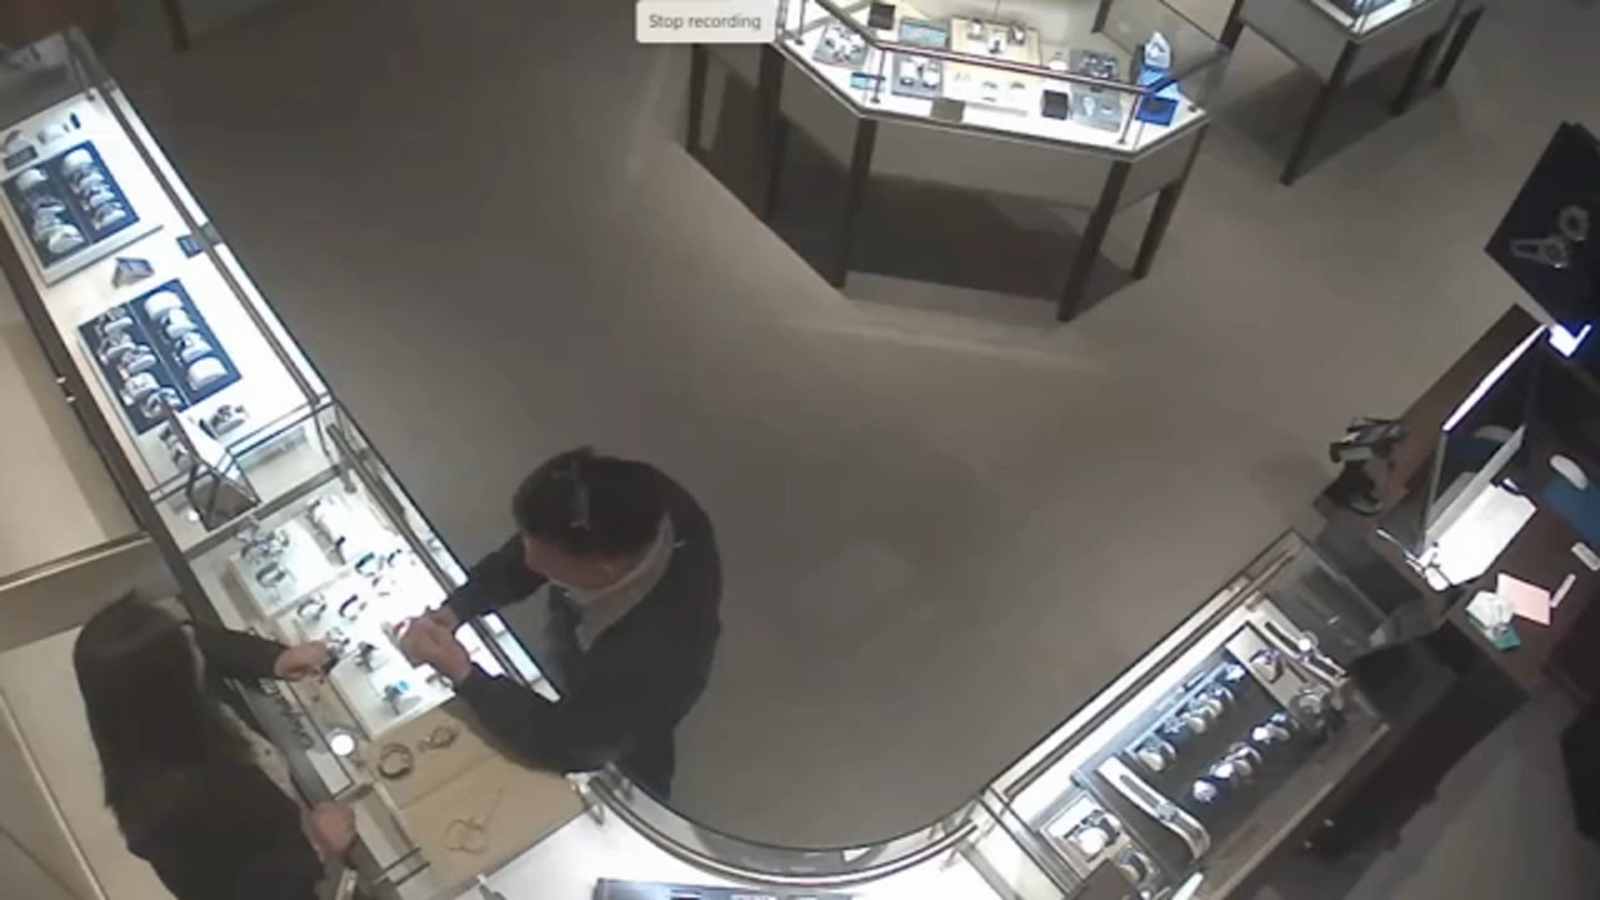 International jewelry thief: Man accused of stealing from Tiffany, Cartier also charged in Chopard watch theft on Long Island [Video]